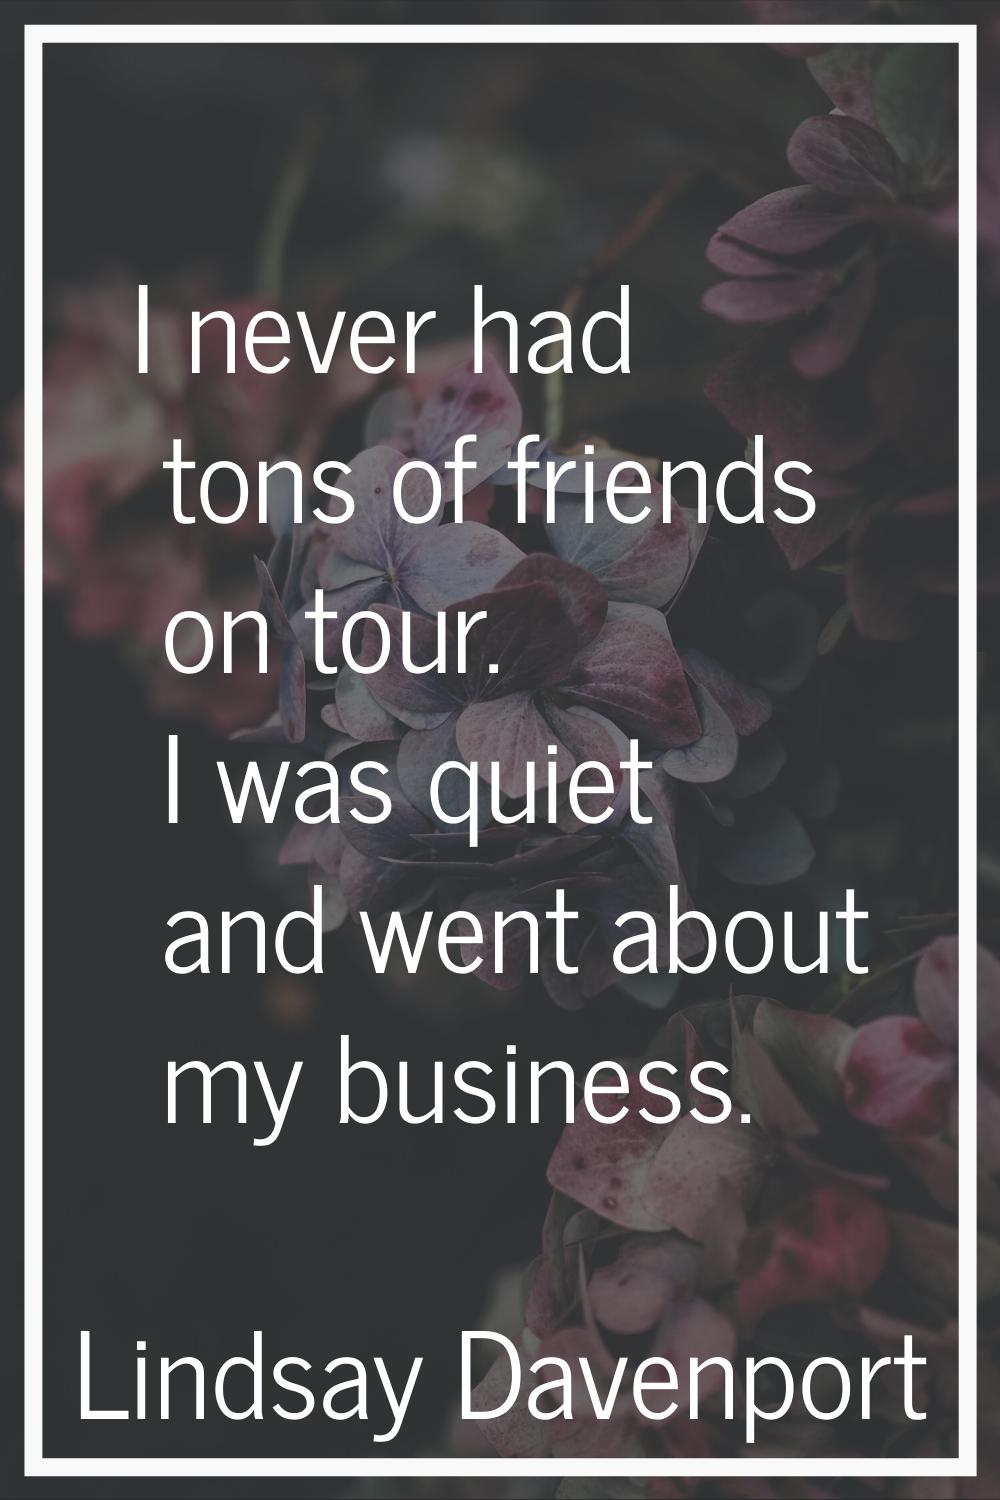 I never had tons of friends on tour. I was quiet and went about my business.